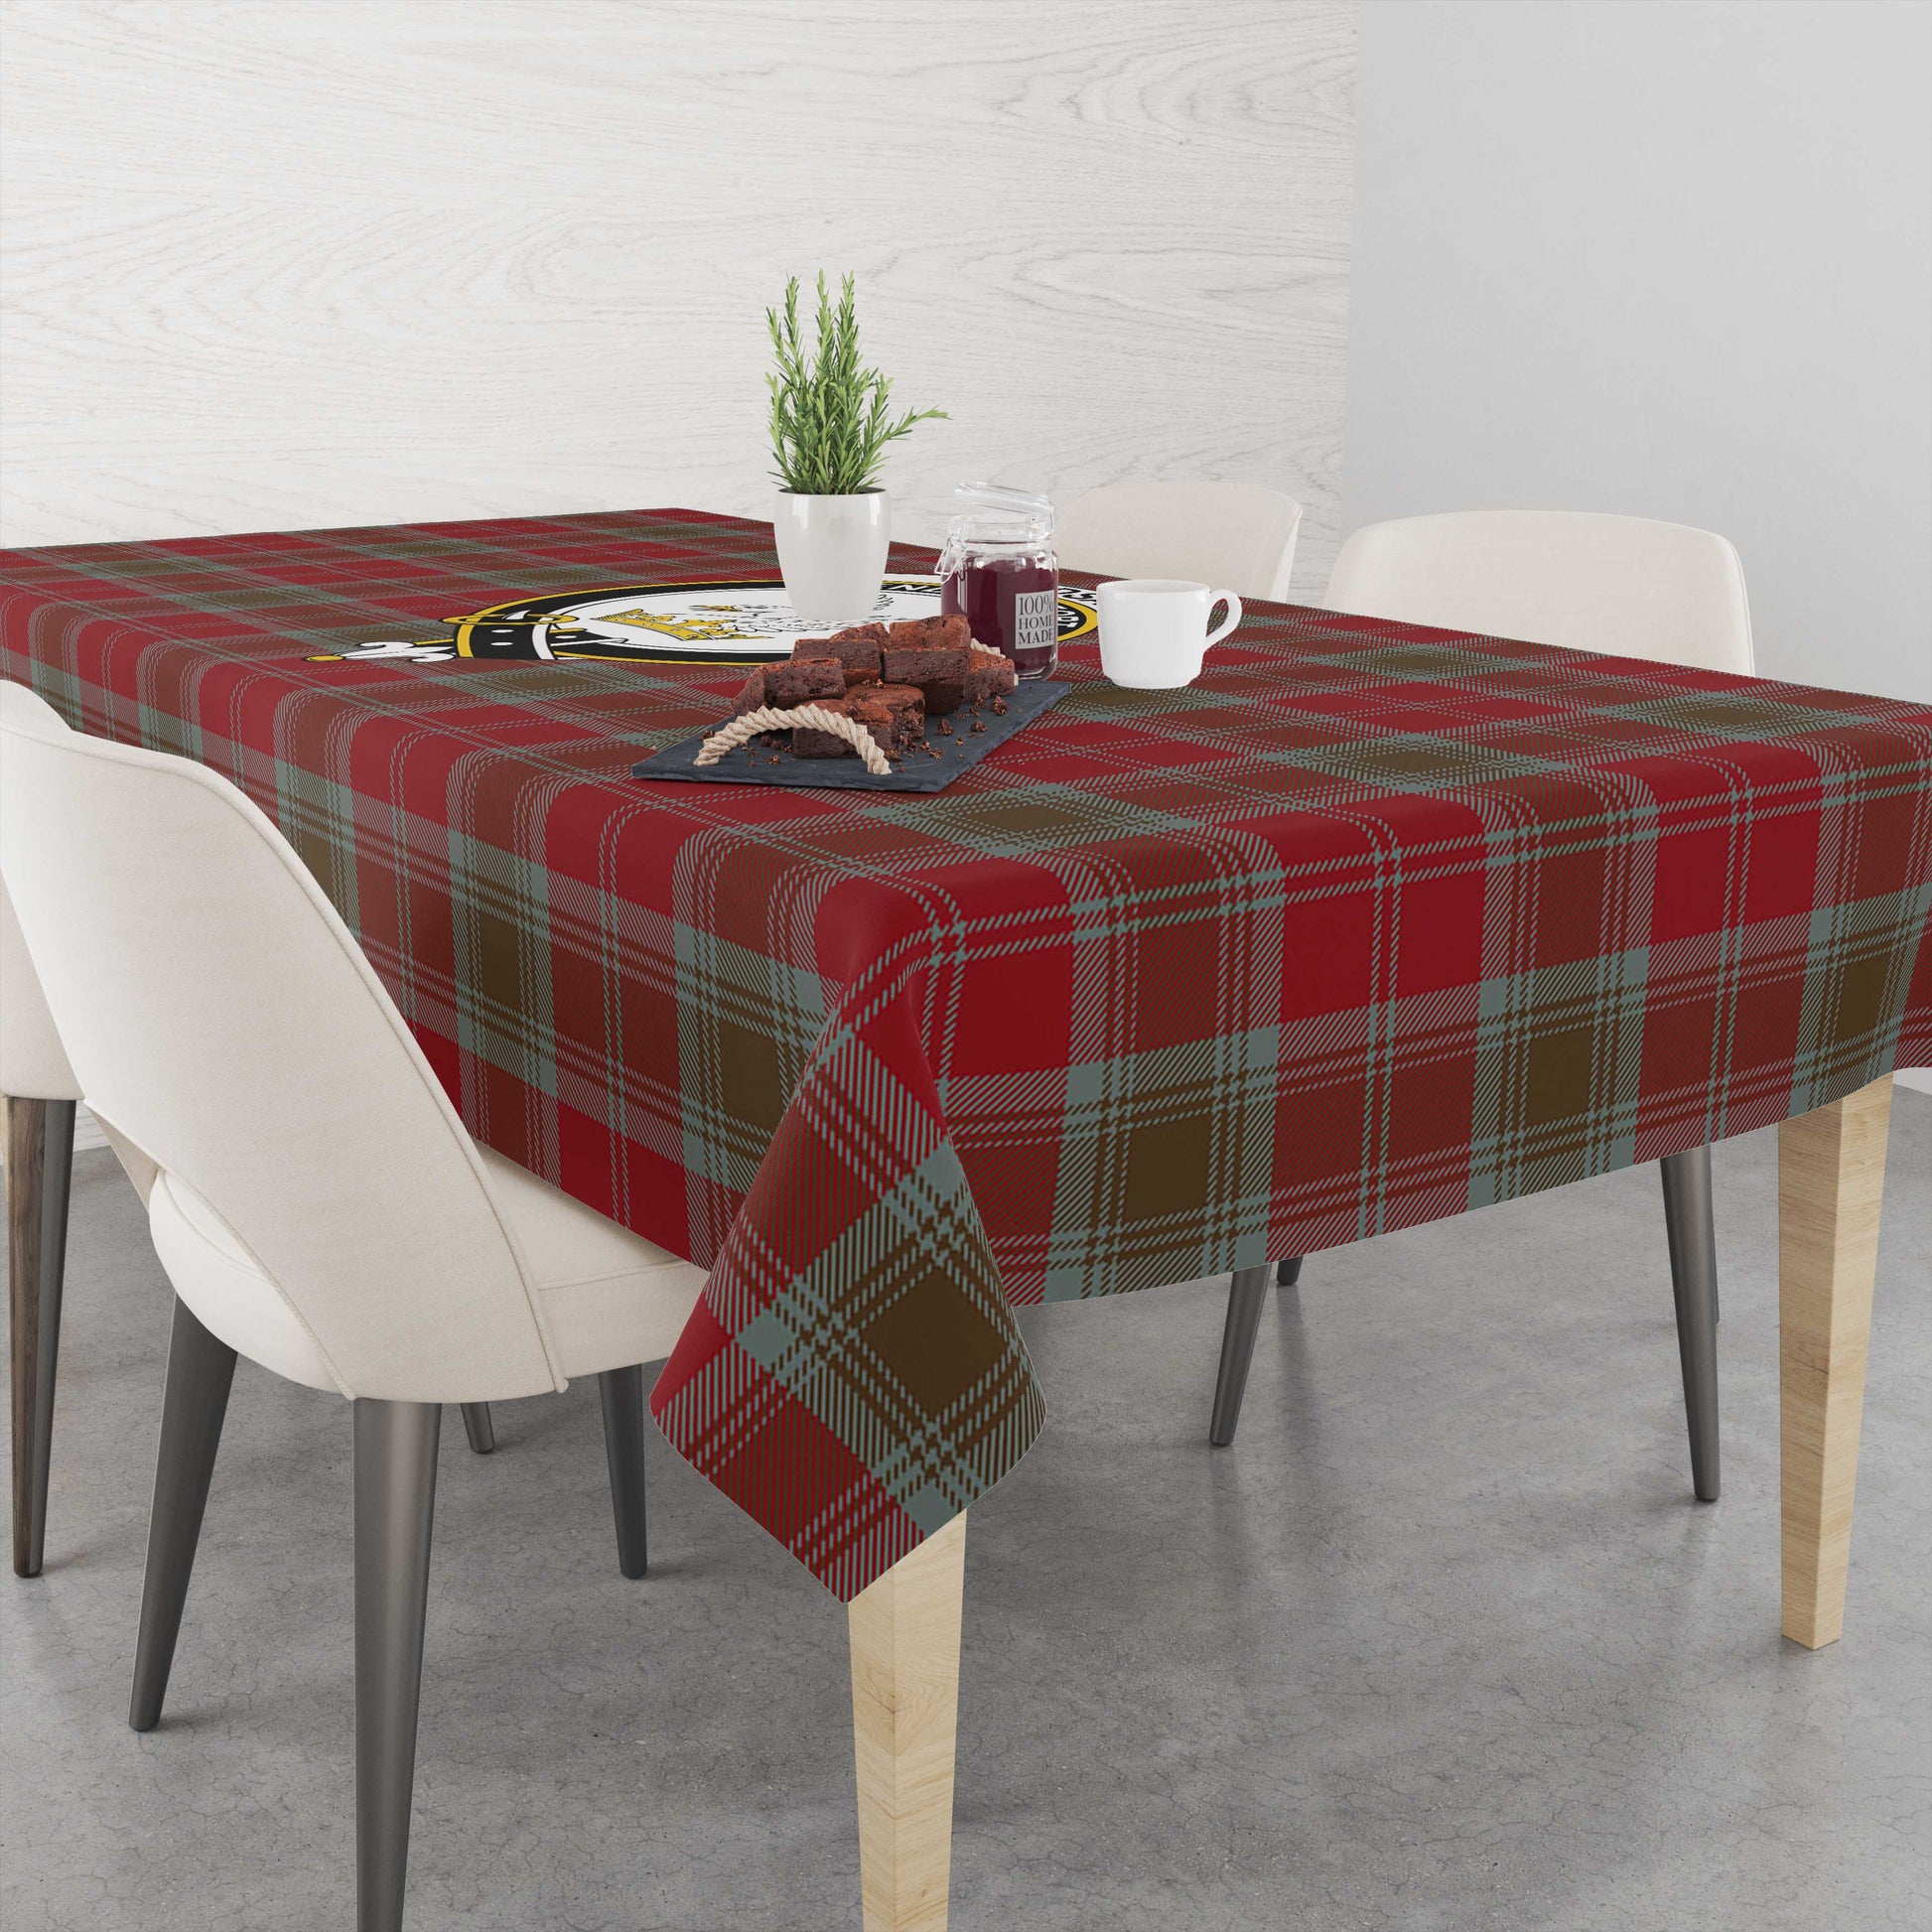 lindsay-weathered-tatan-tablecloth-with-family-crest